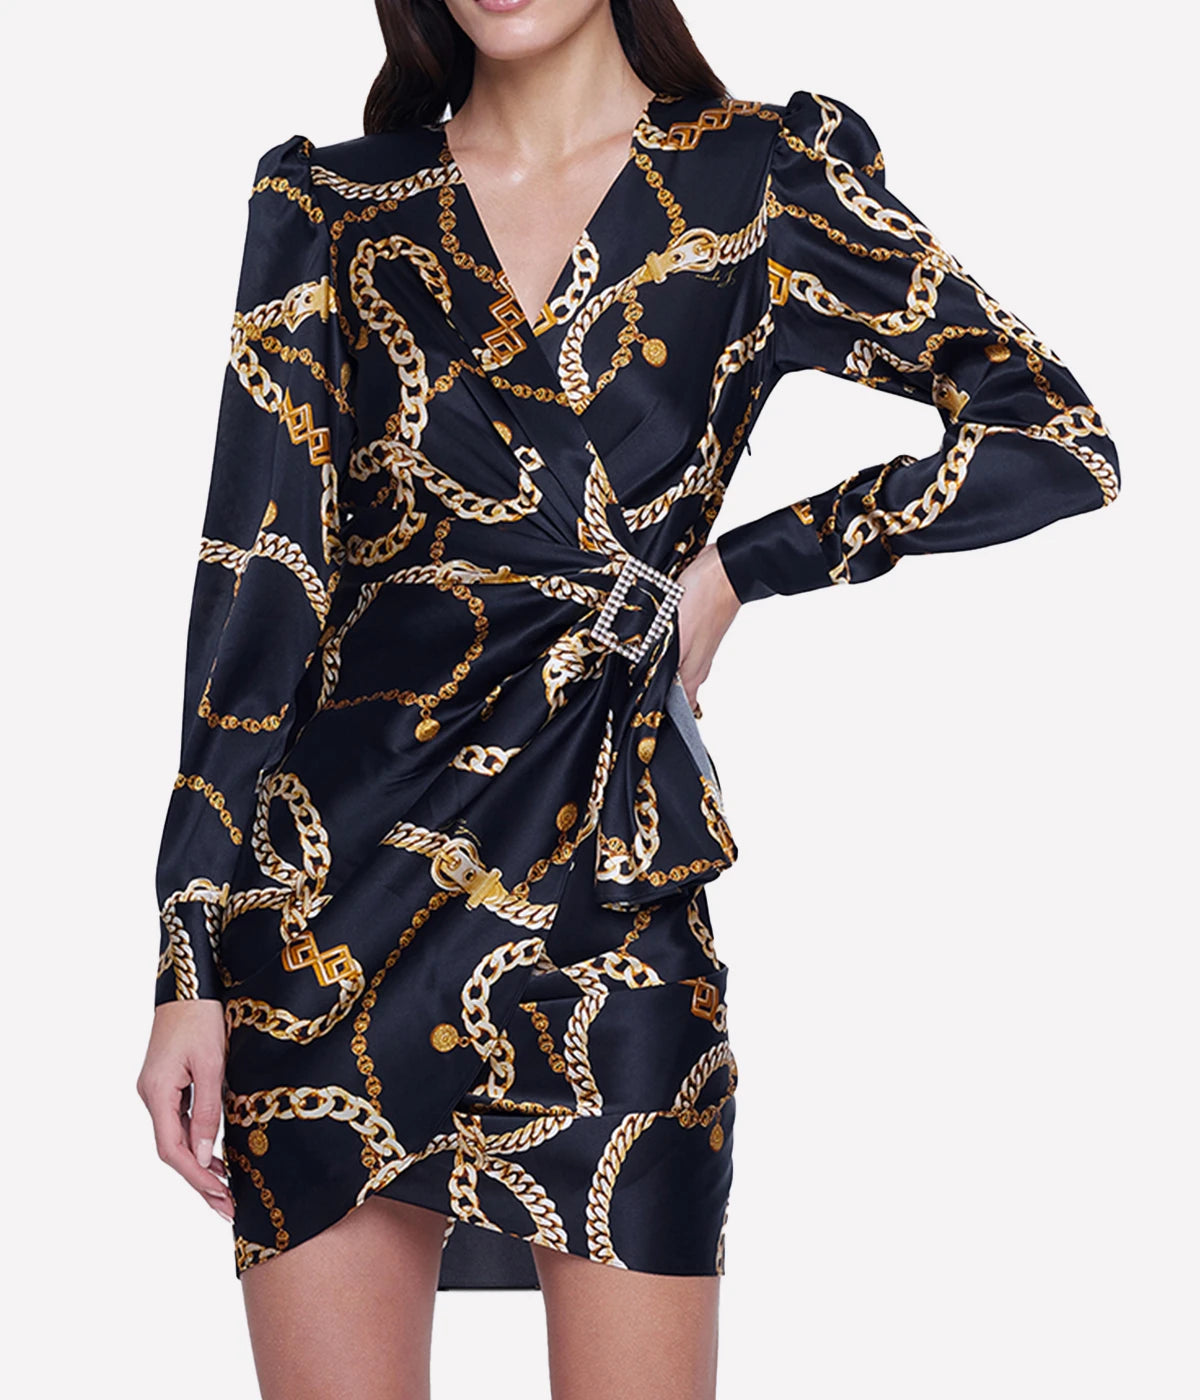 Clarice Wrap Dress in Black & Gold Classic Chain